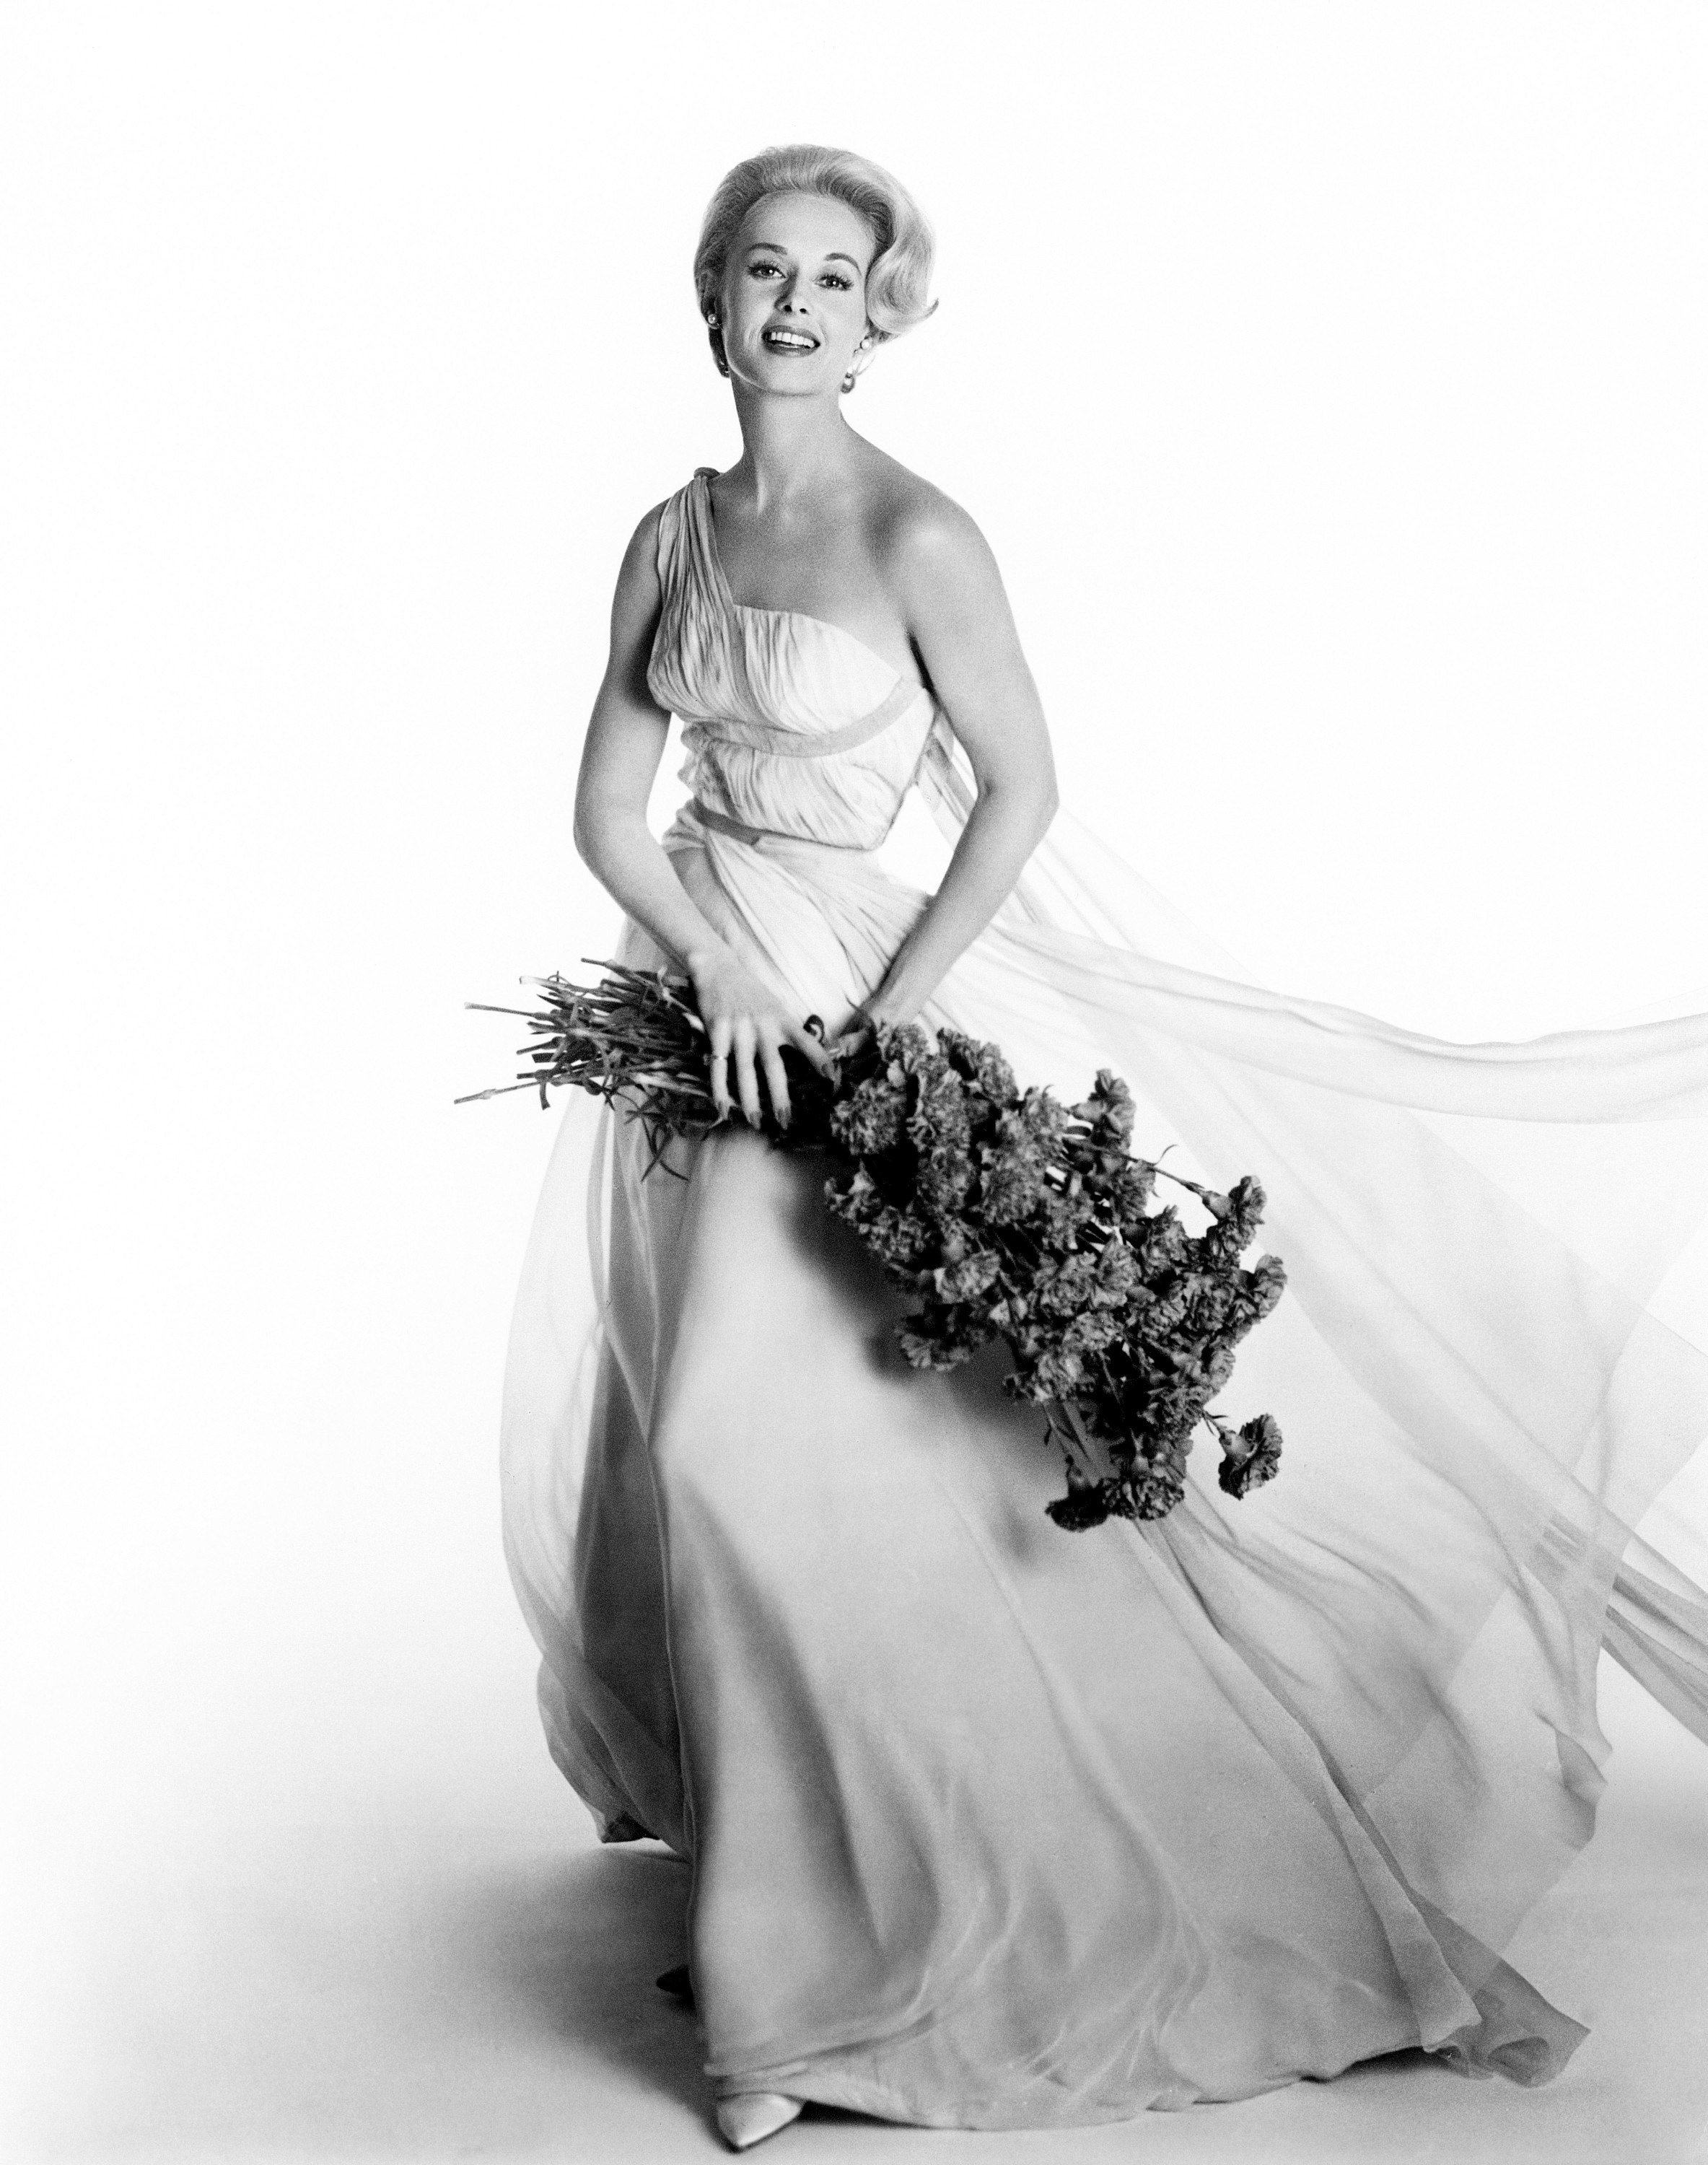 Hedren poses with a flowing dress holding a bouquet of flowers